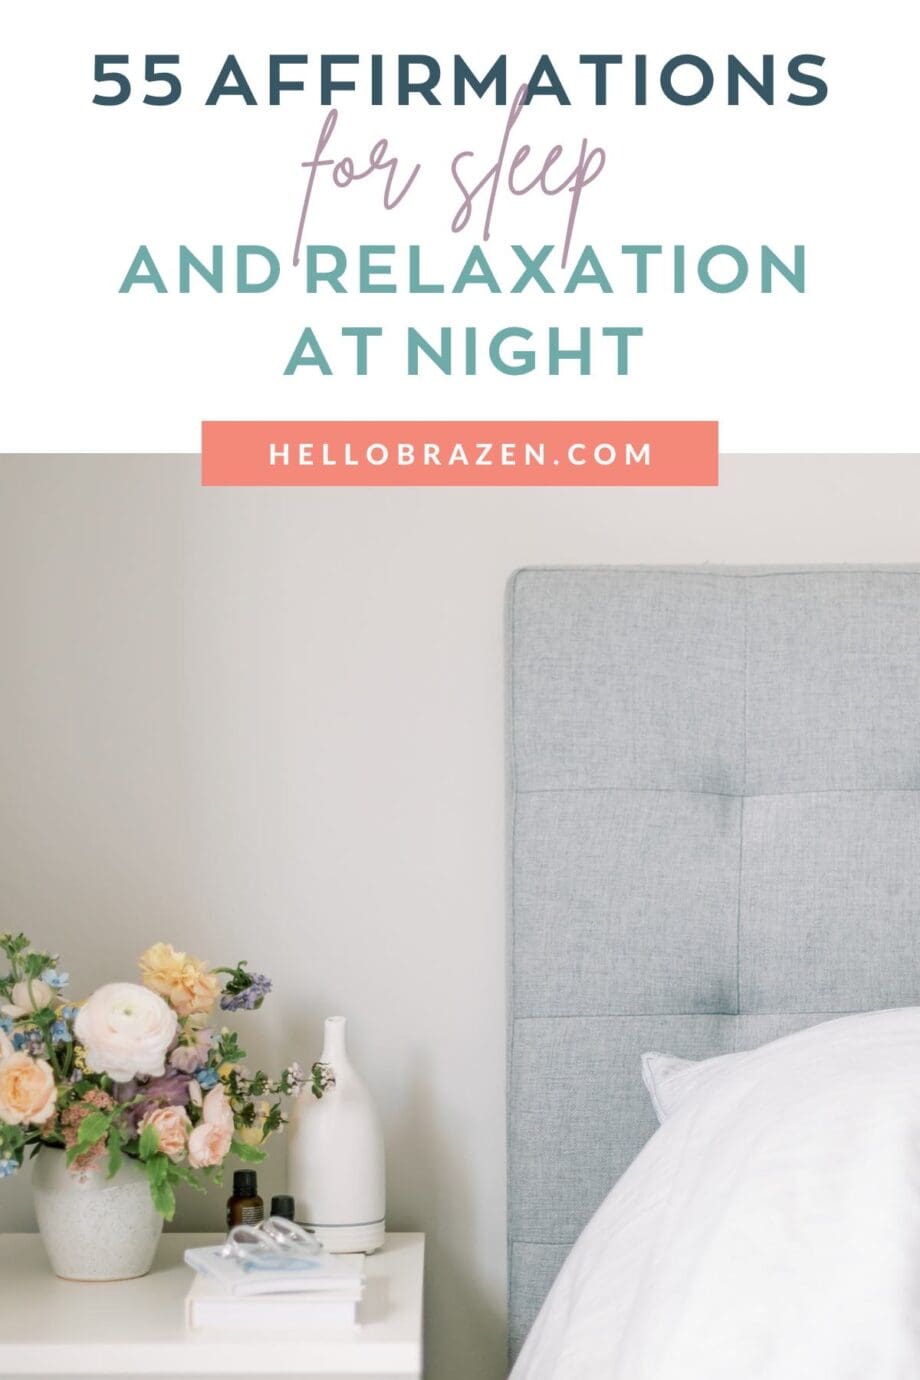 Many things can make it difficult to fall asleep. When we can’t fall asleep, we can’t get good rest which affects all aspects of our lives. To help you fall asleep, here are 55 affirmations for sleep and relaxation at night.